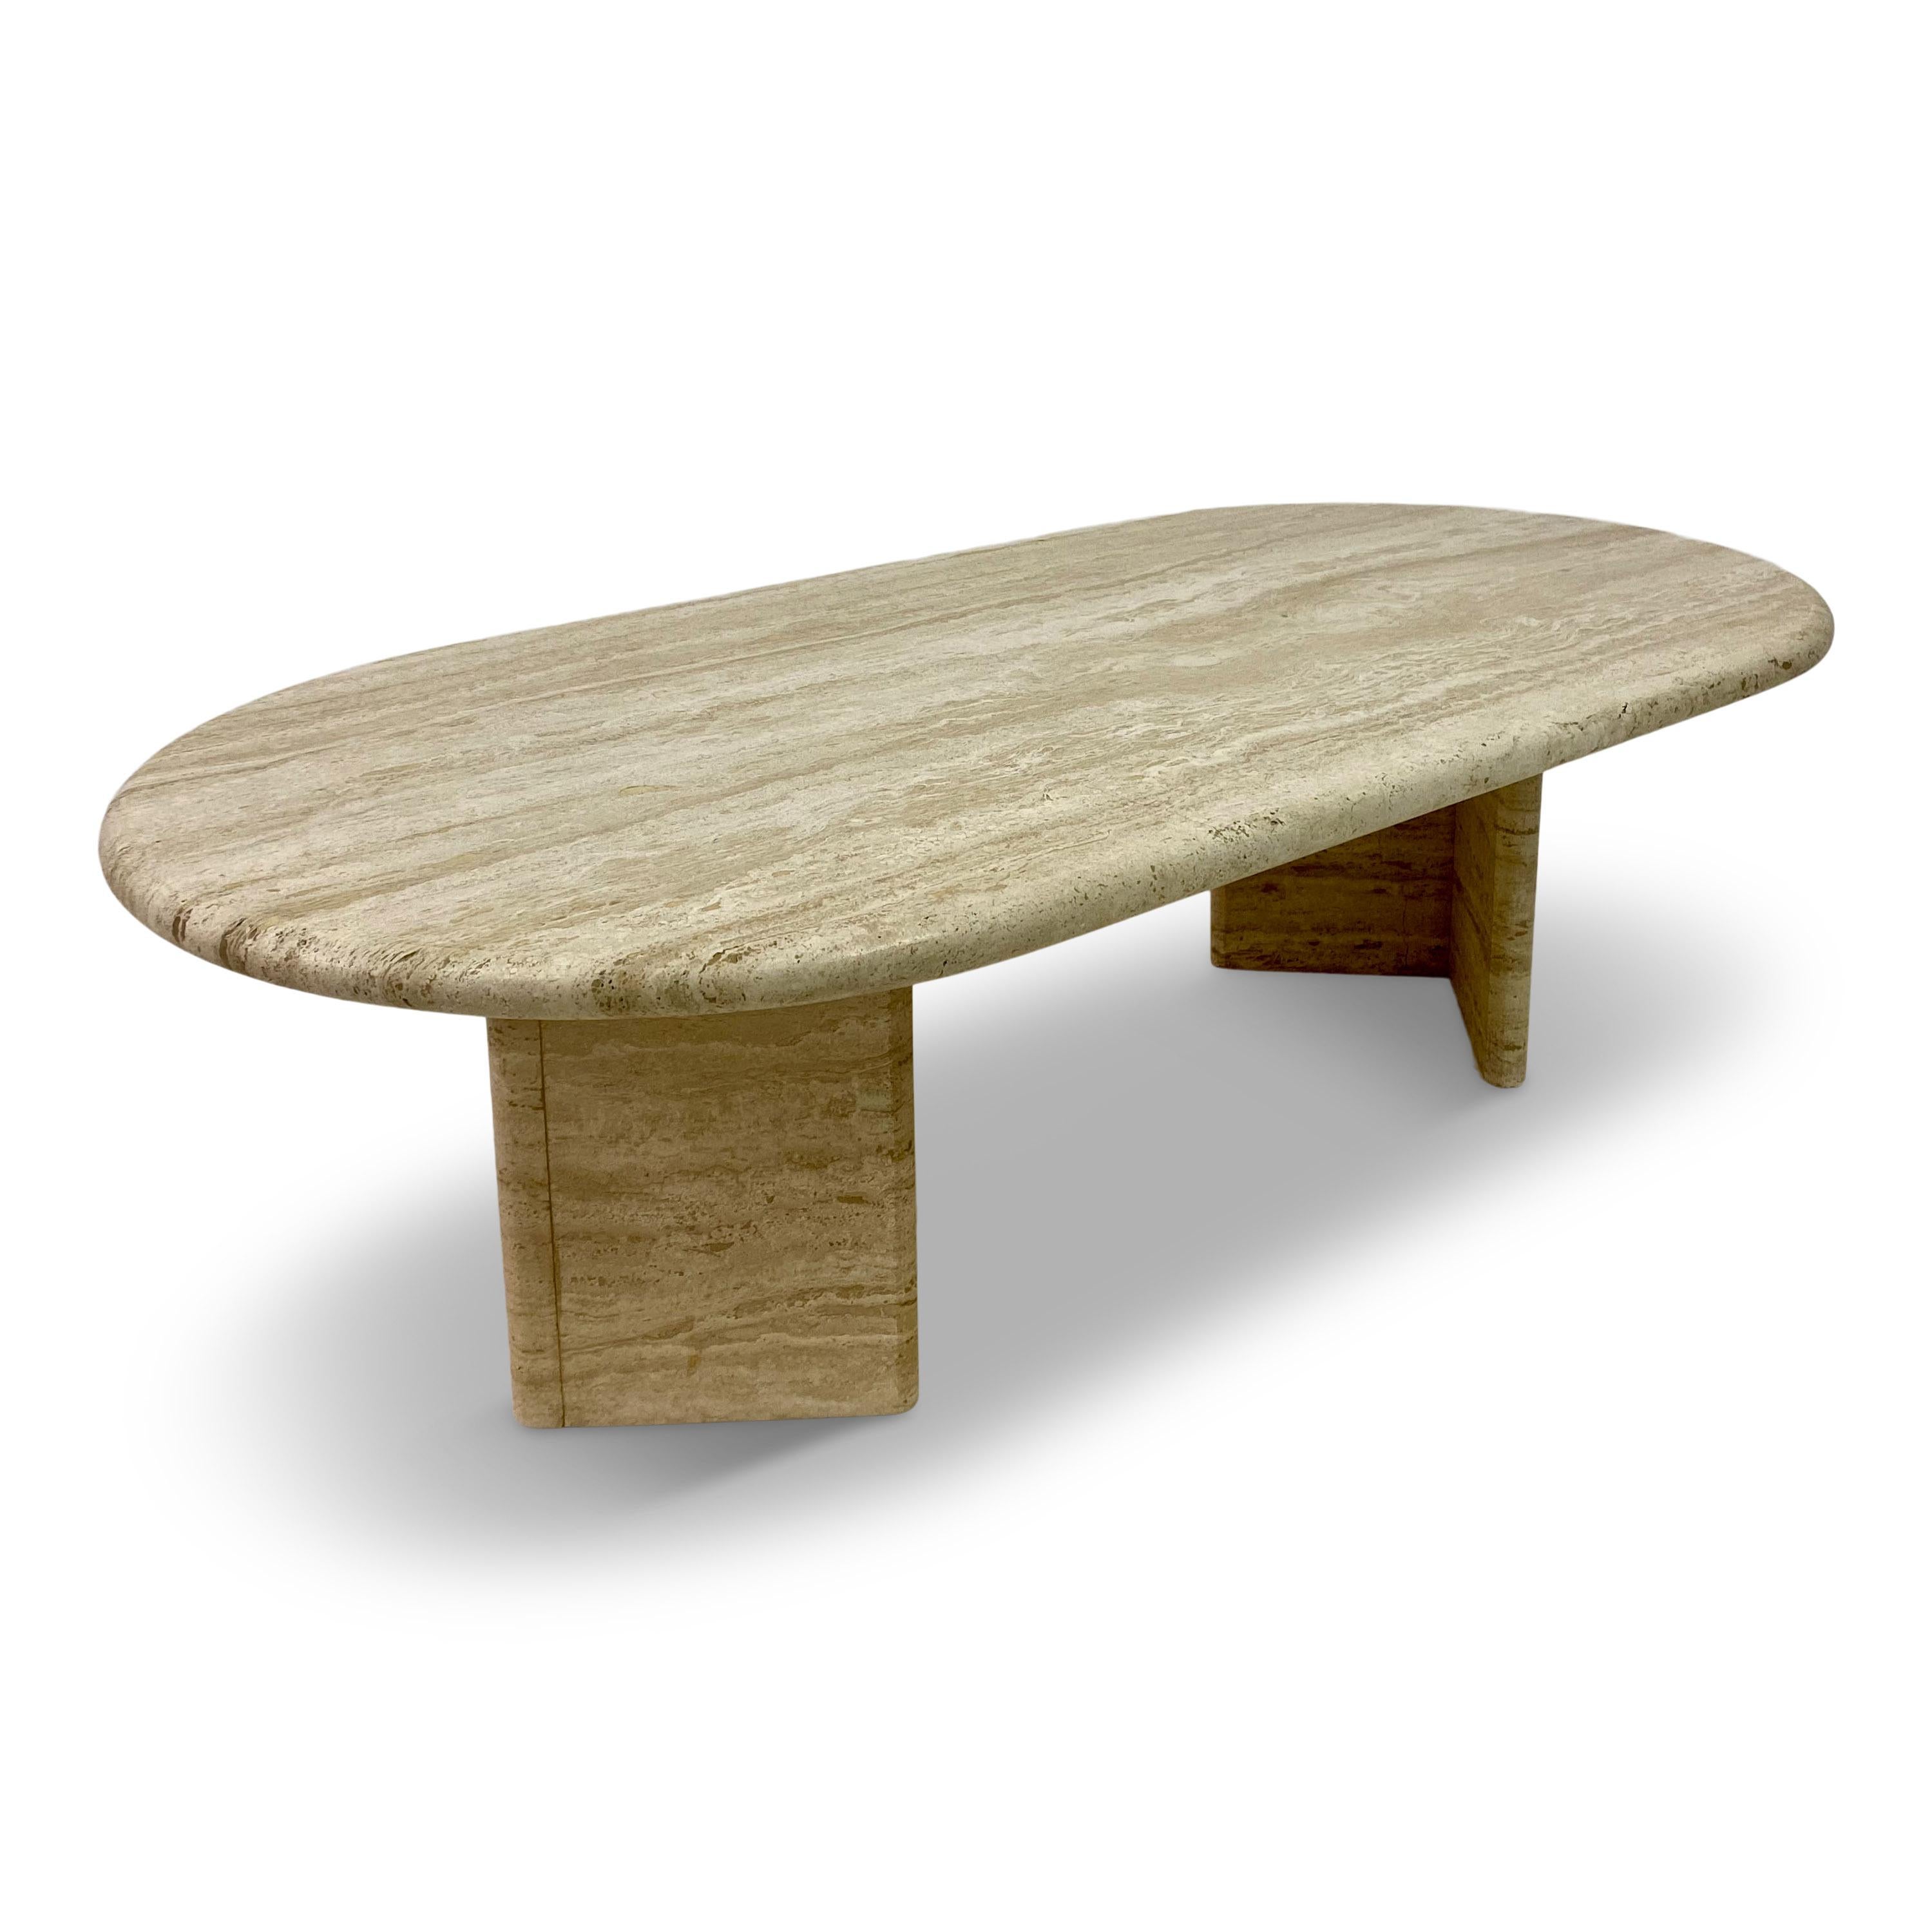 Oval coffee table

Travertine

Two angled base supports

Italian 1970s/1980s.